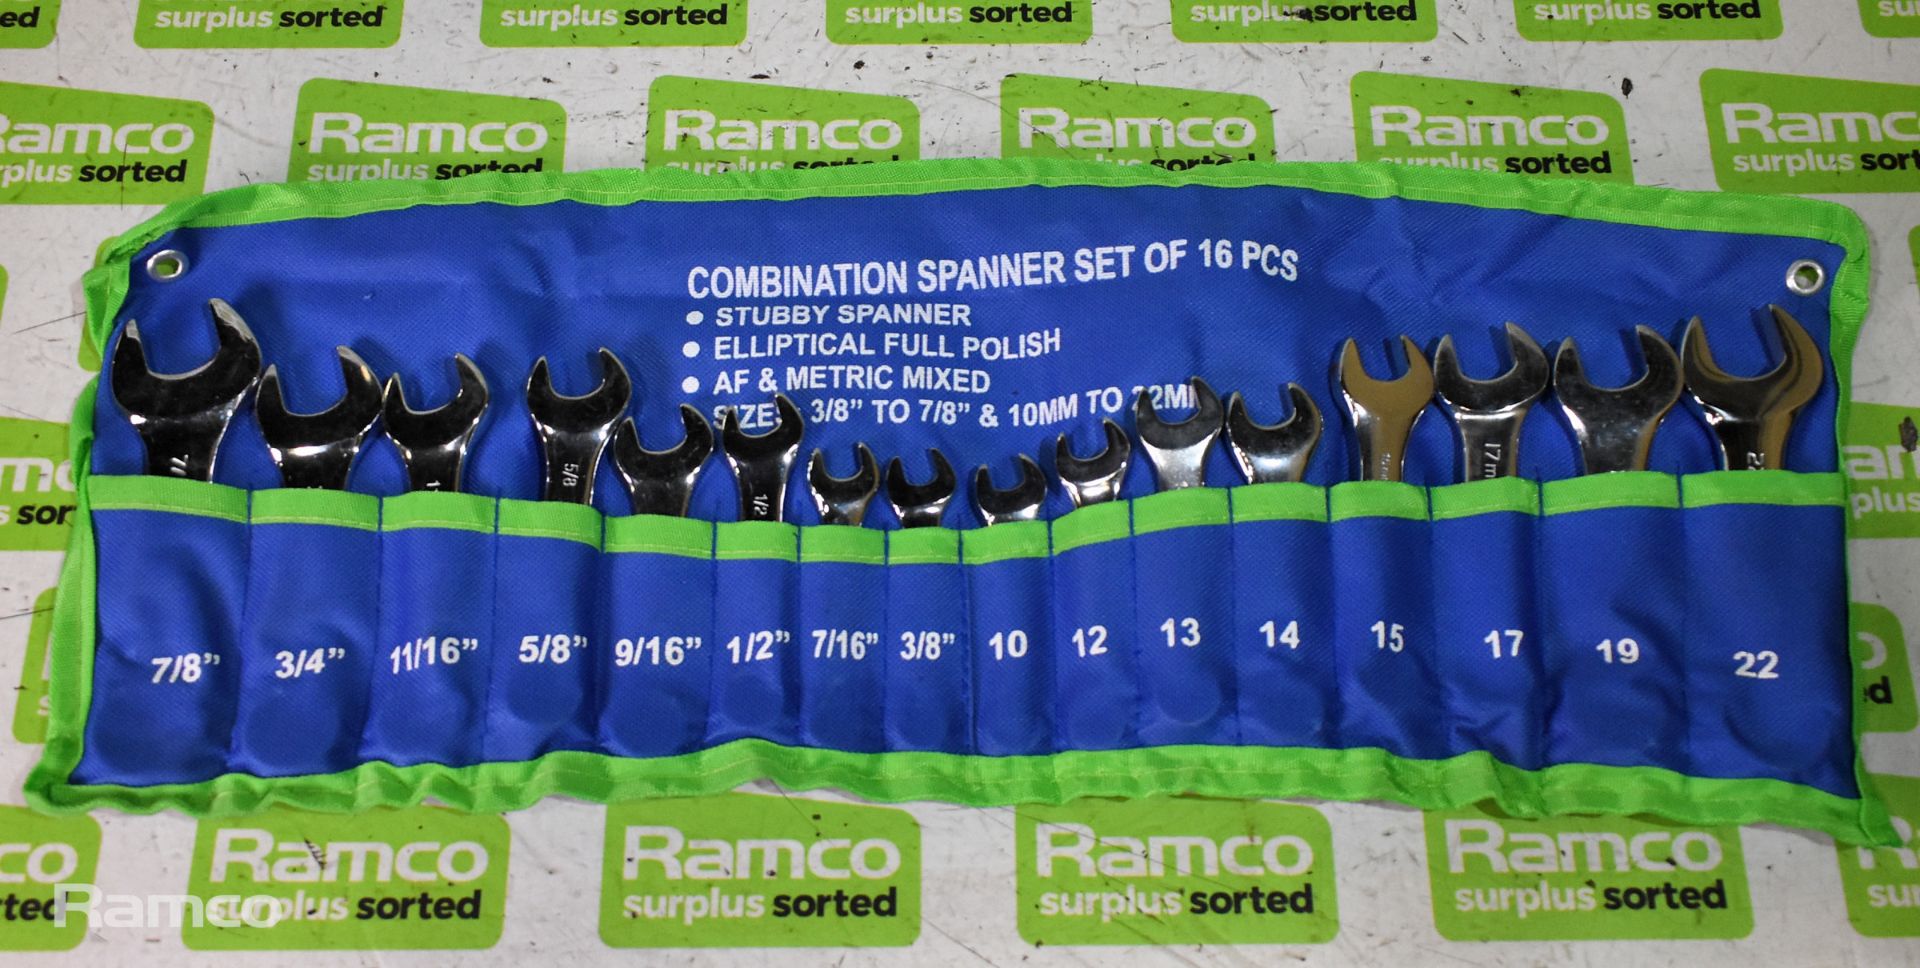 4x 16 Piece CTO150 combination stubby spanner sets - 10mm-22mm & 3/8in-7/8in & more - Image 2 of 8